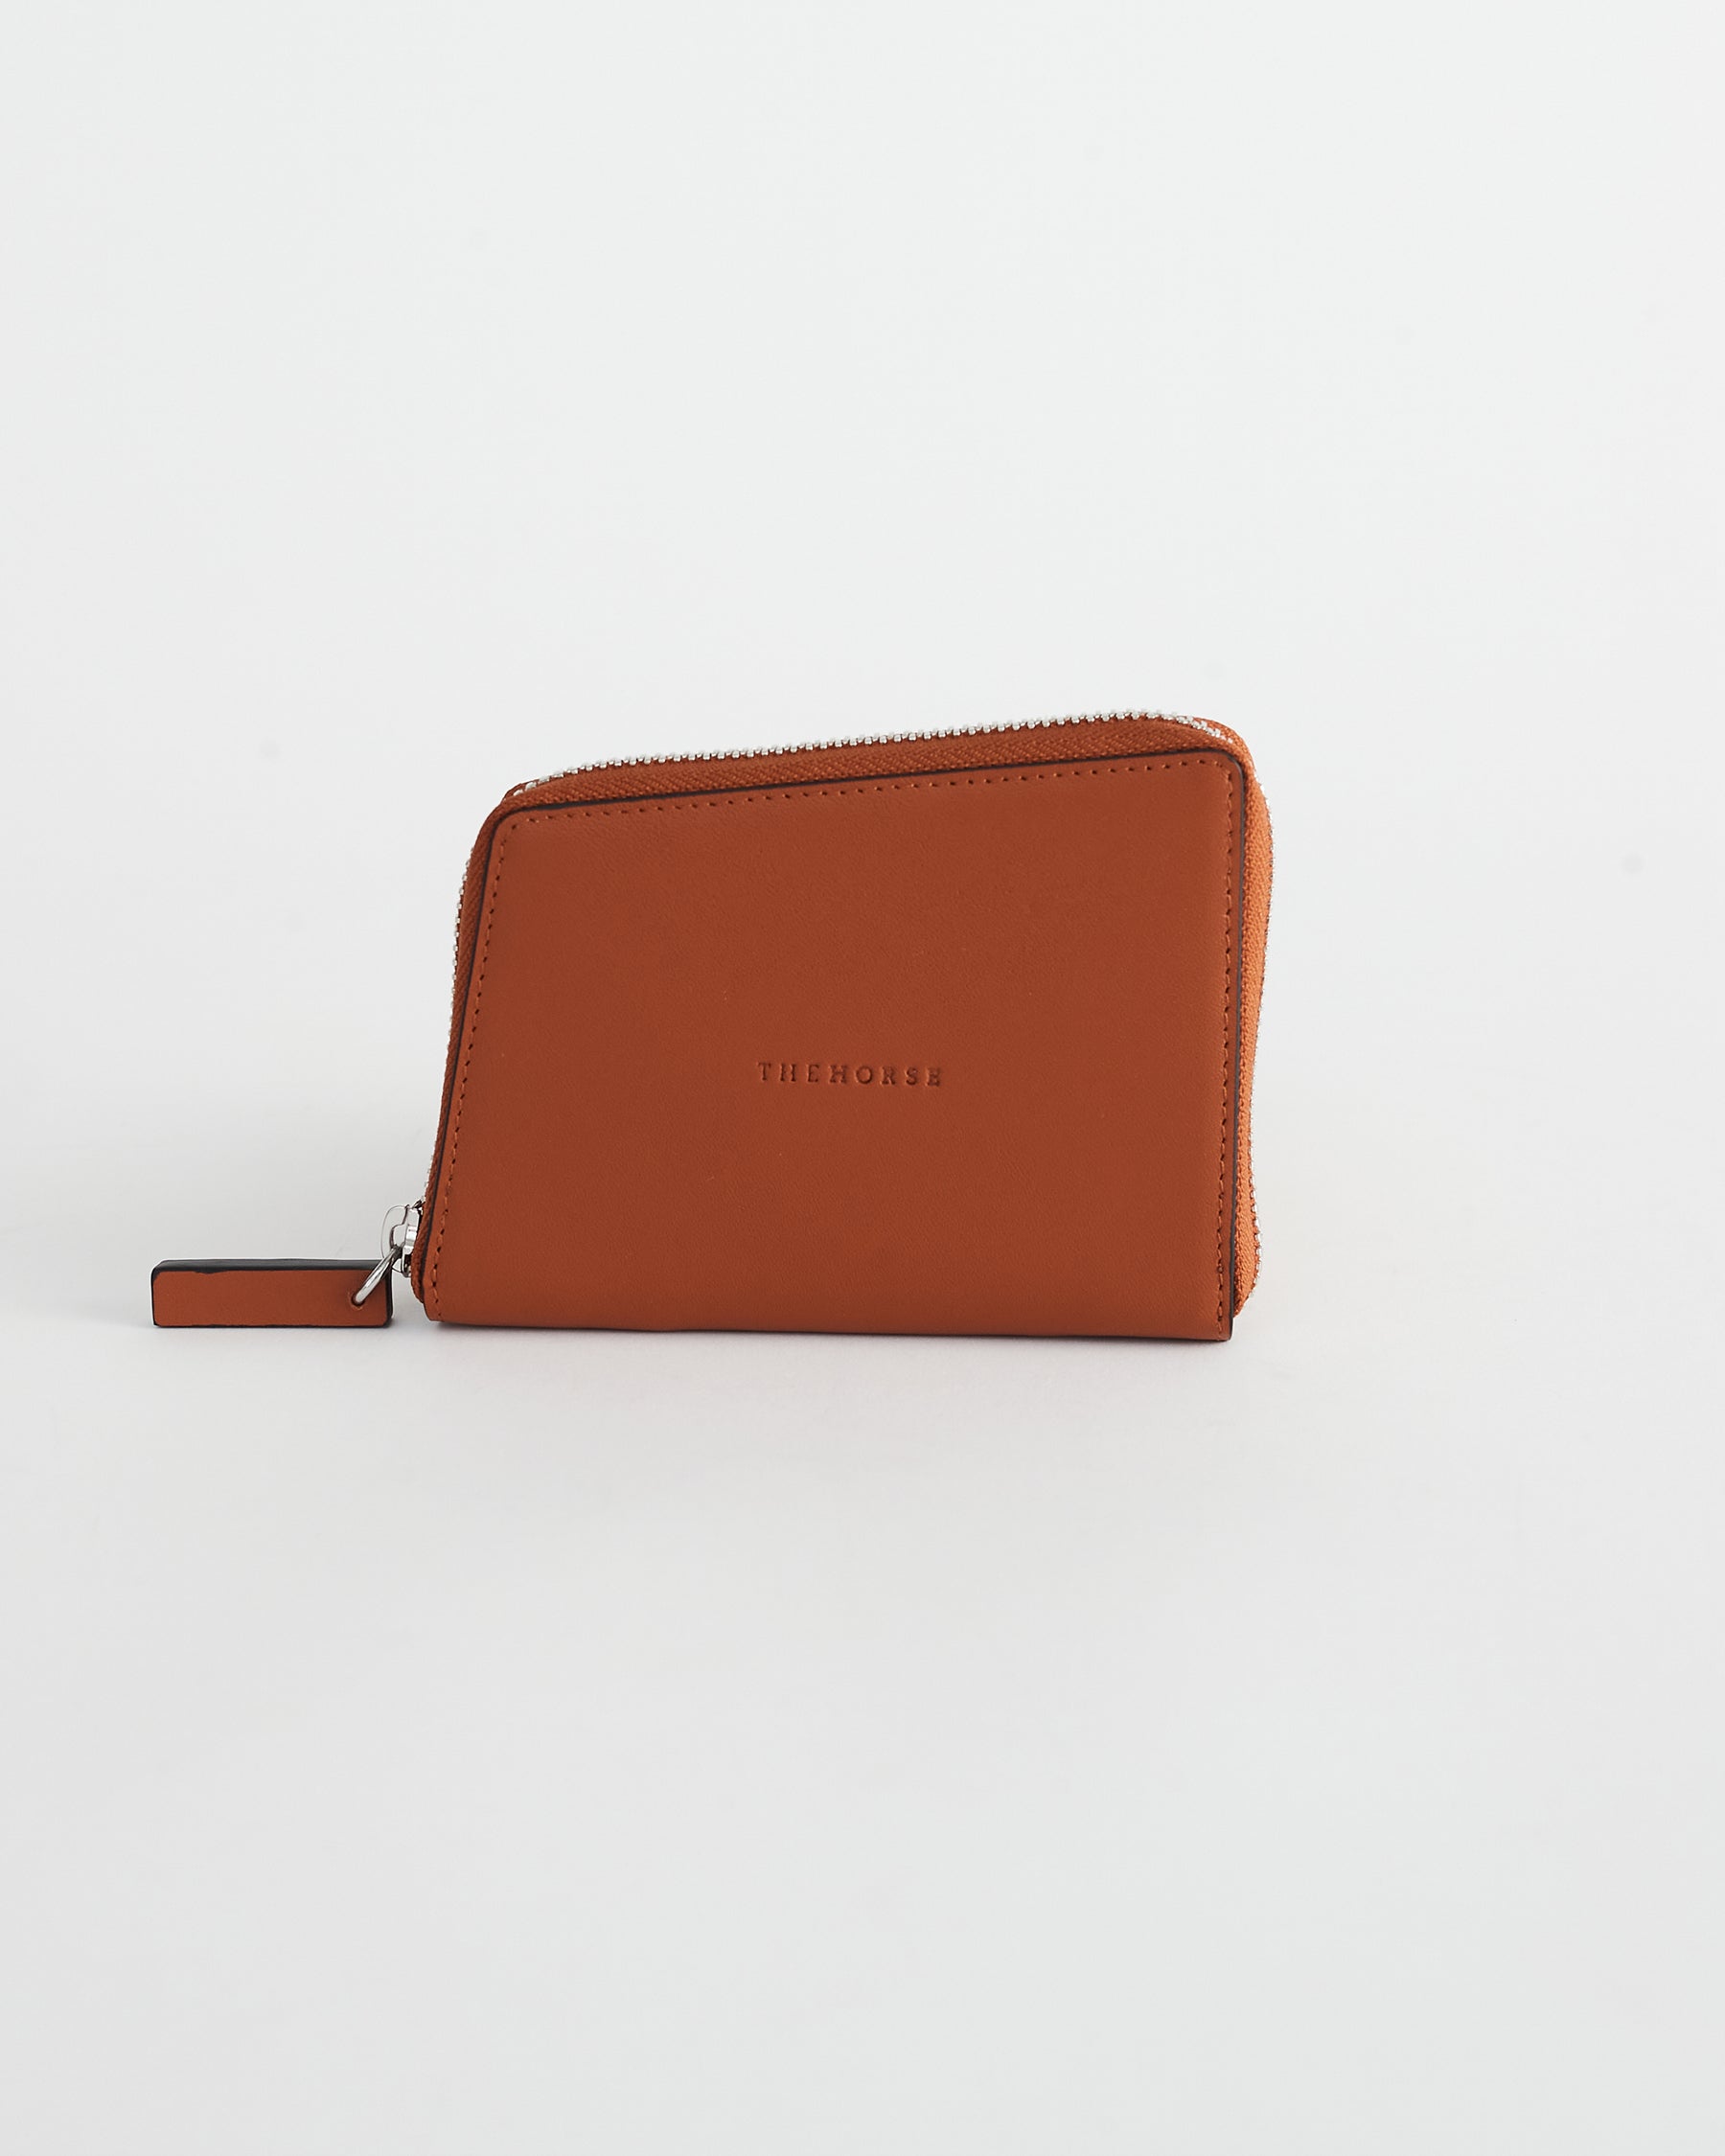 The Bo Women's Compact Leather Zip Wallet in Tan by The Horse®